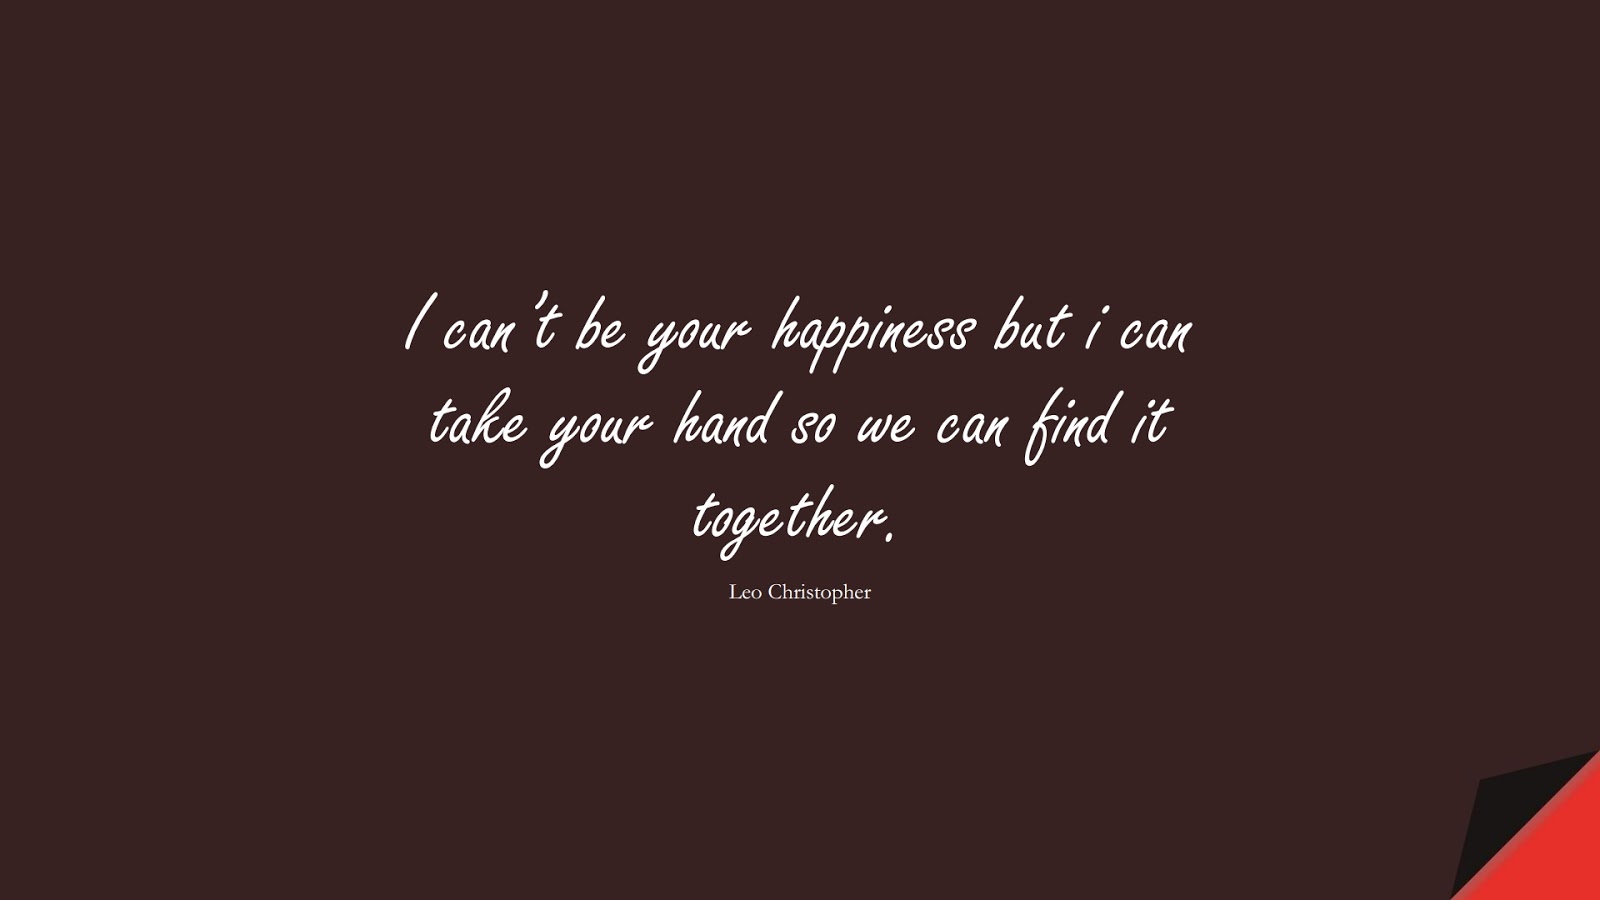 I can’t be your happiness but i can take your hand so we can find it together. (Leo Christopher);  #LoveQuotes